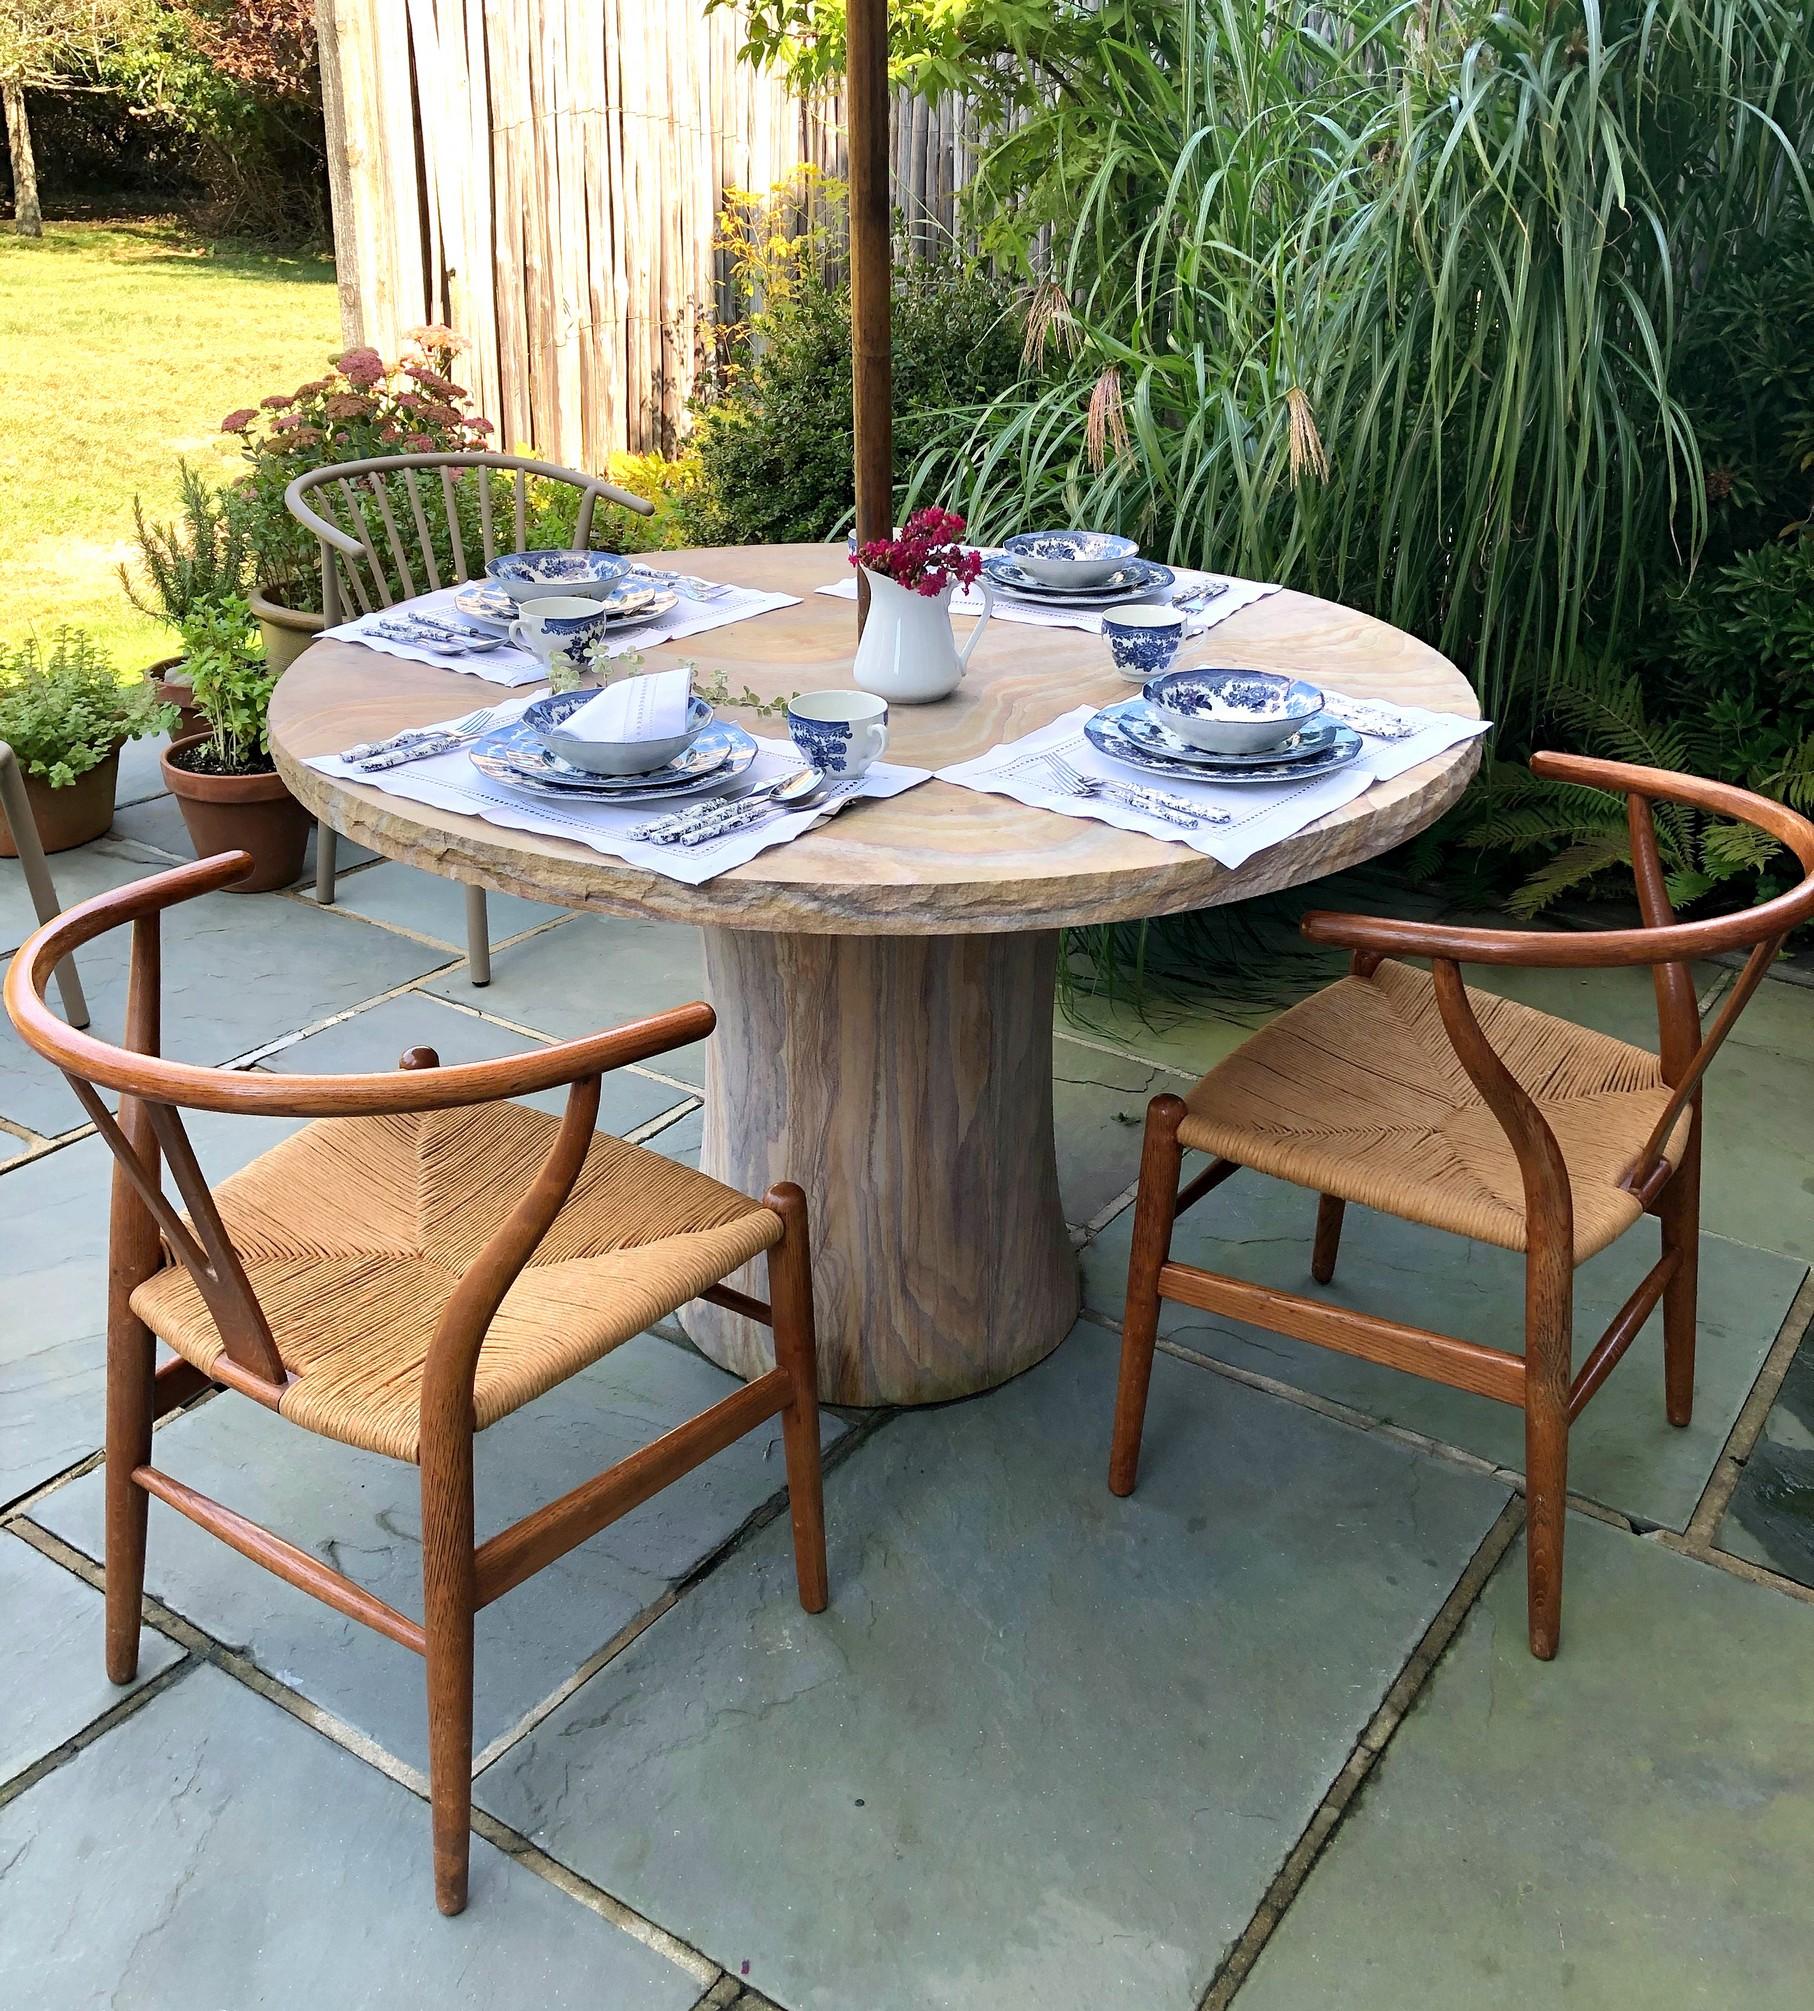 This round outdoor table is designed by Paul Mathieu for Stephanie Odegard. 
This is a hand-carved, hand-crafted round outdoor table. 

When the renowned designer Paul Mathieu first saw the extraordinary swirling colours and patterning of the modern